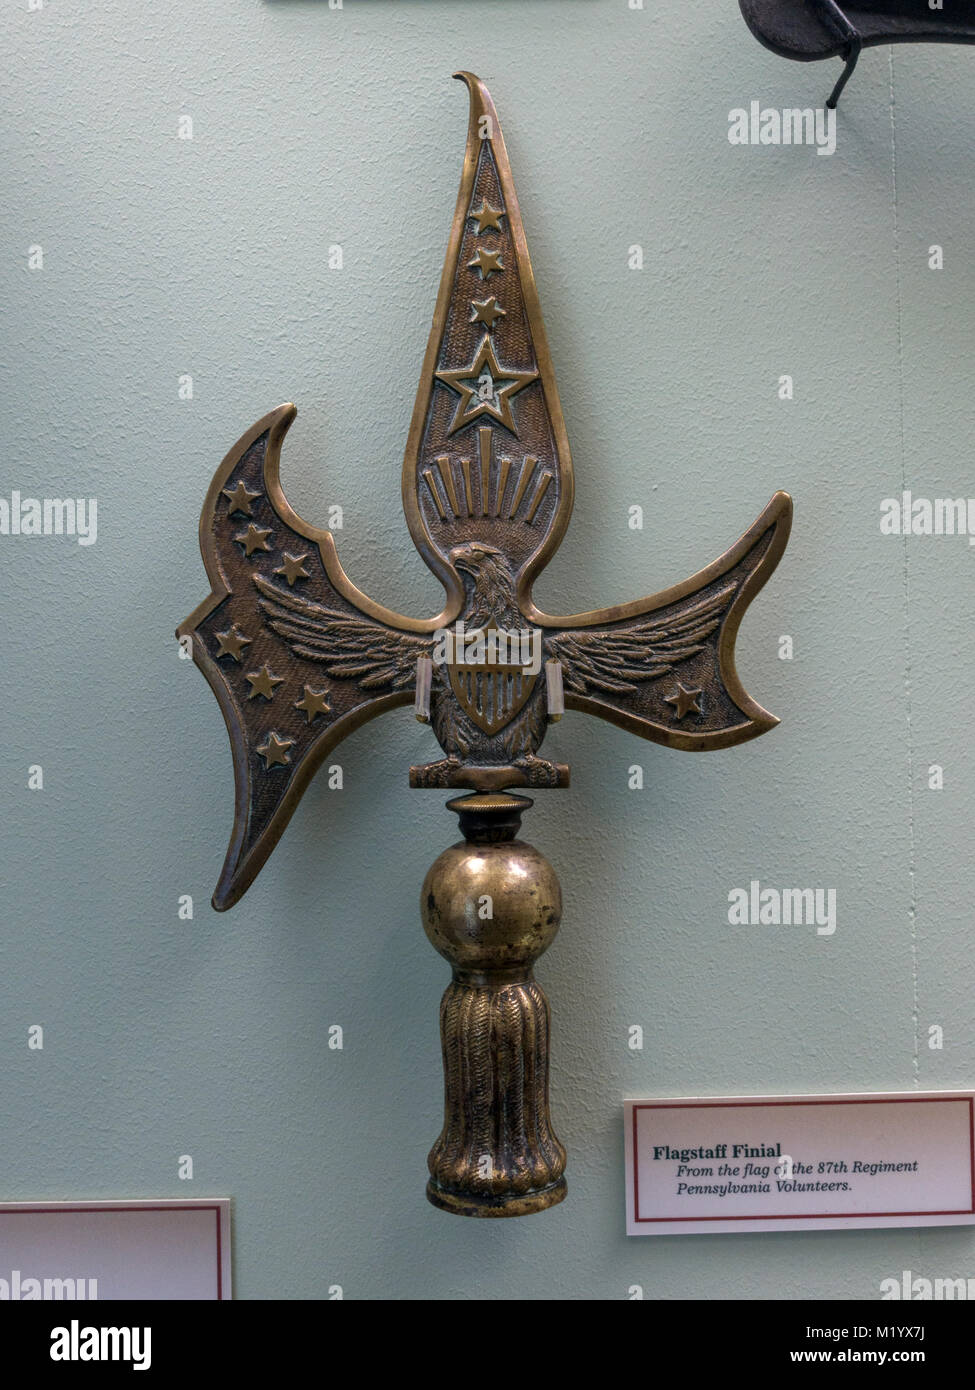 Flagstaff Finial from a Civil War era flag on display inside the Visitors Center, Monocacy National Battlefield, Frederick, MD, USA. Stock Photo